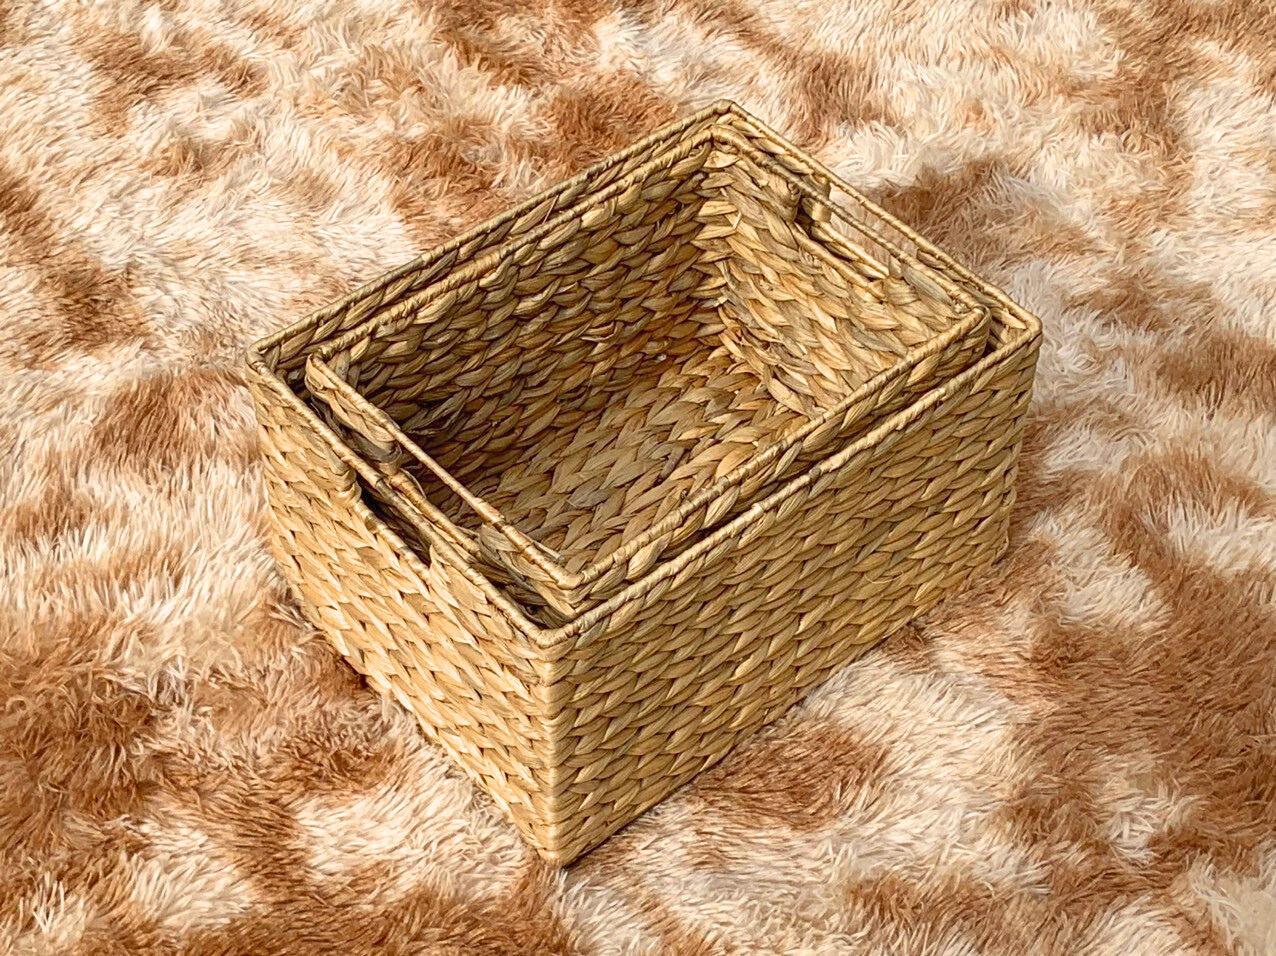 Water Hyacinth Storage Baskets Is Completed And Ready For Export To The Market.